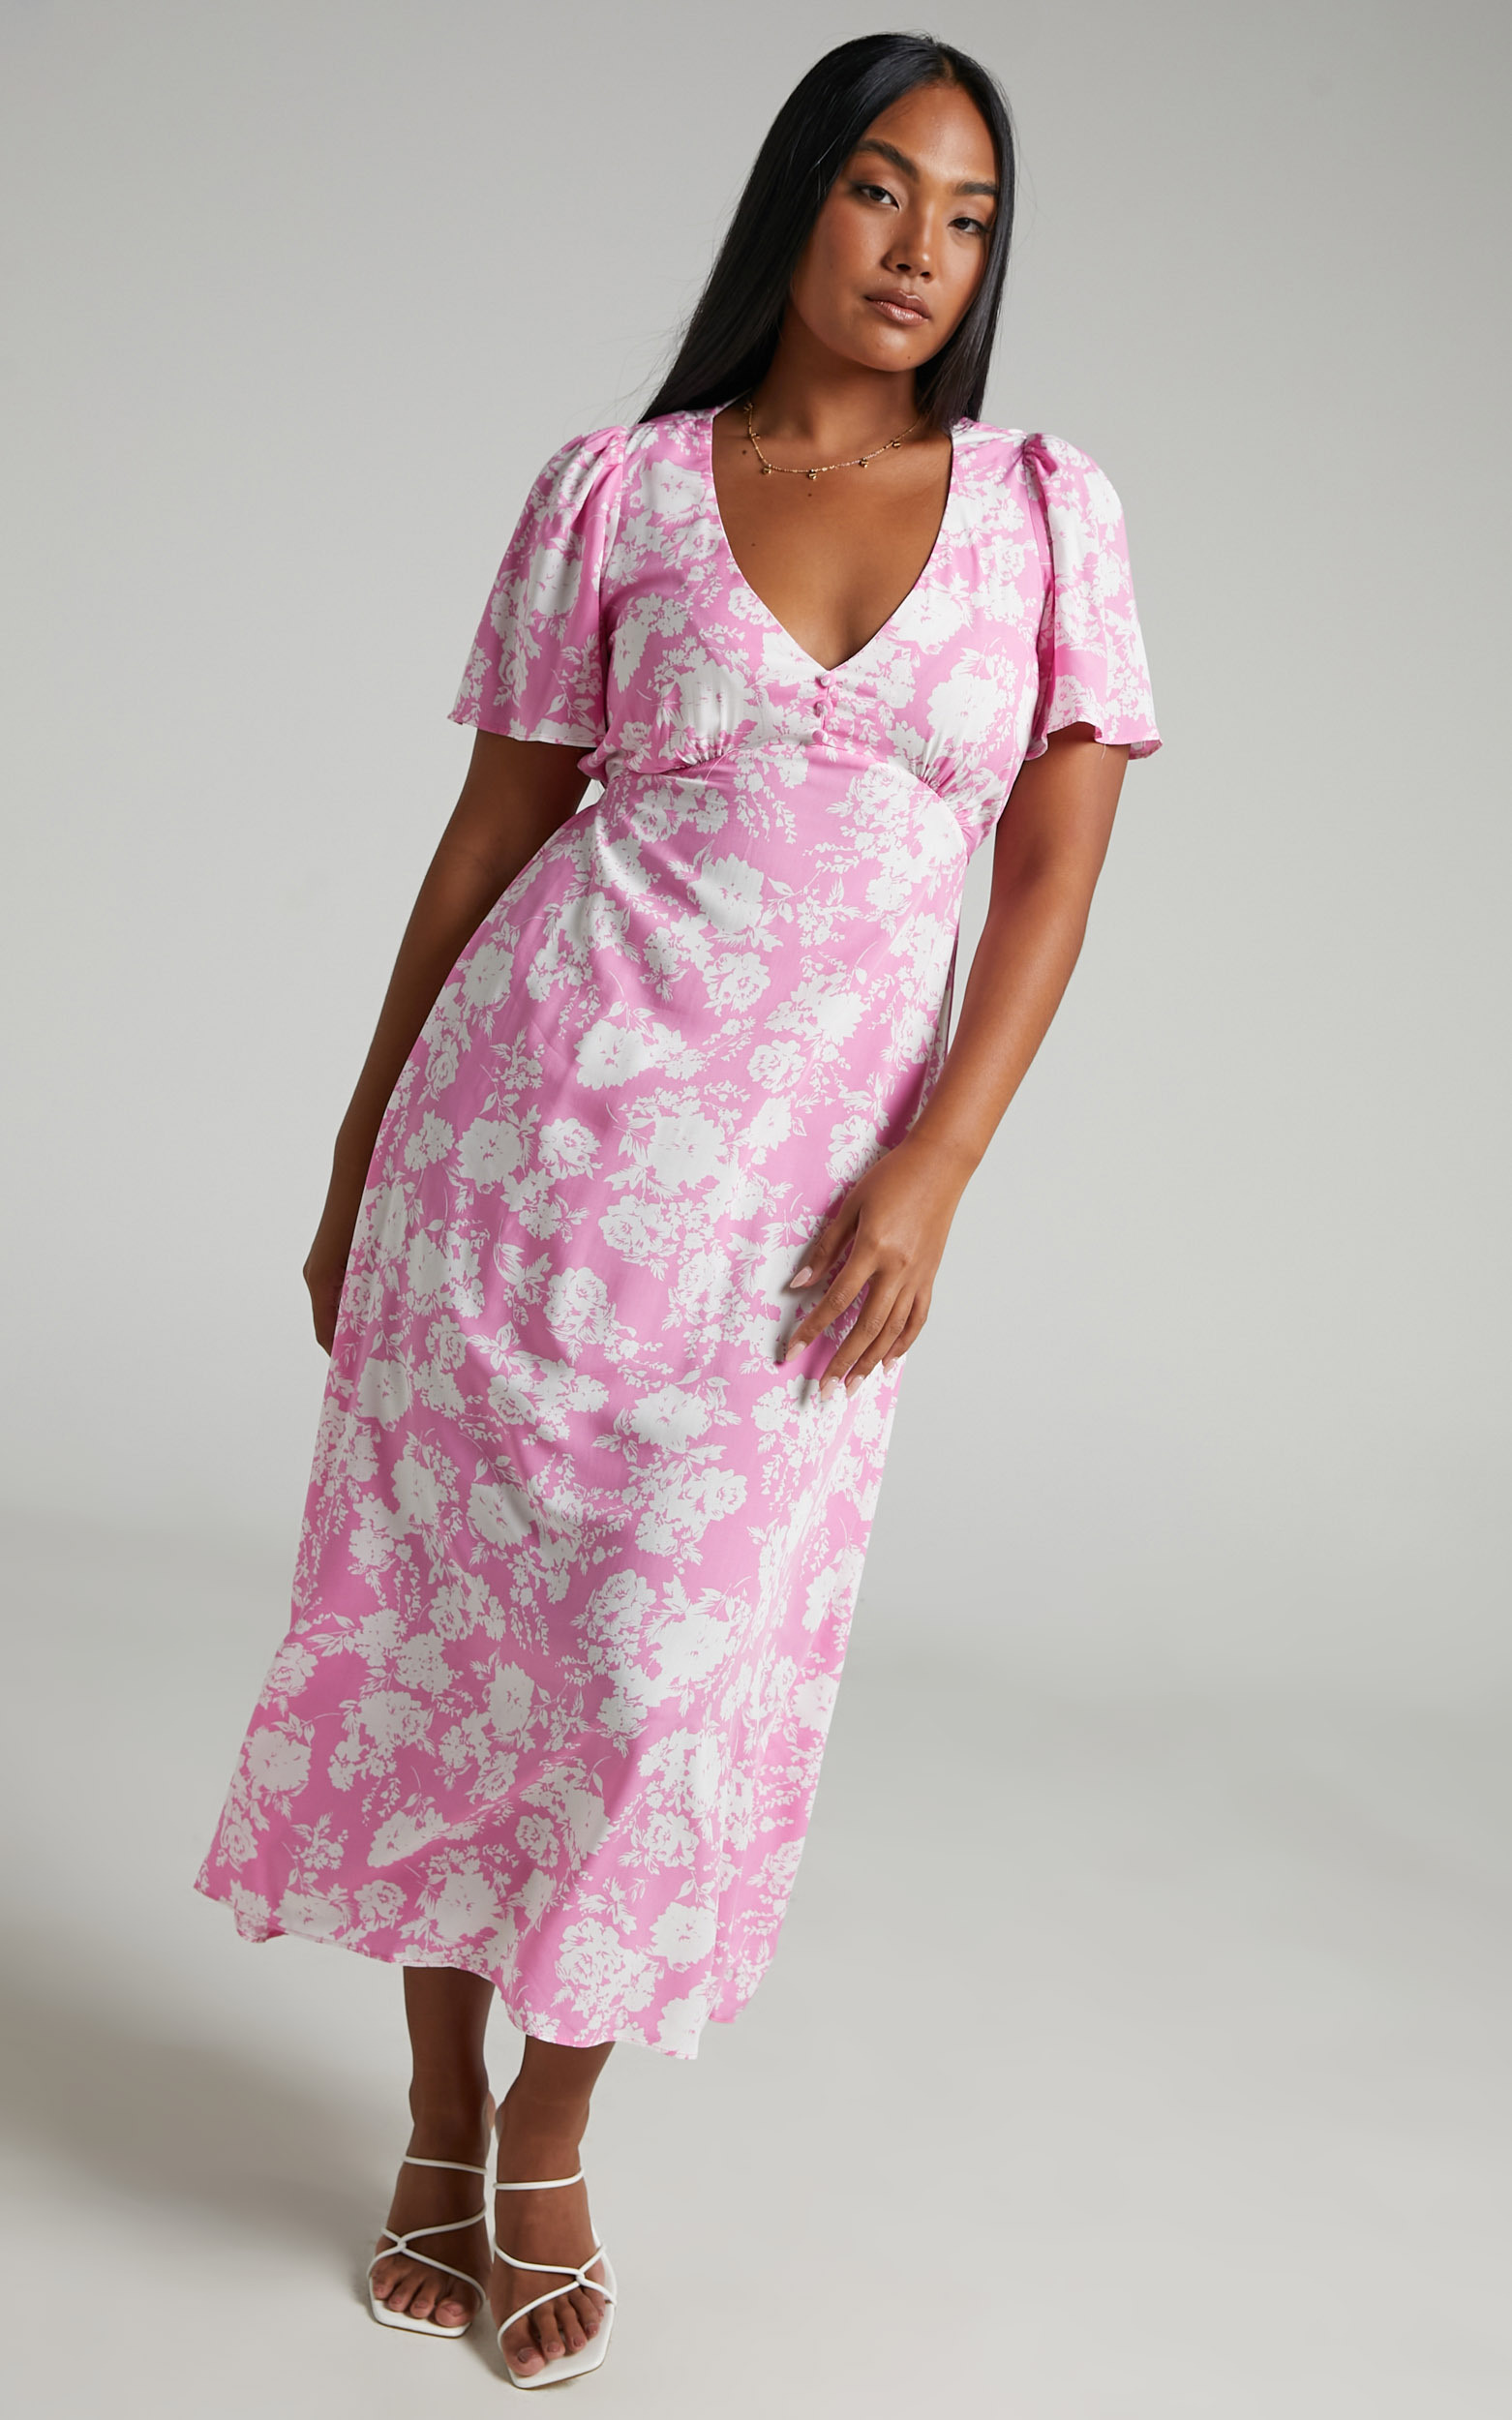 Ranella Button Front Midi Dress in Pink Floral - 06, PNK1, hi-res image number null